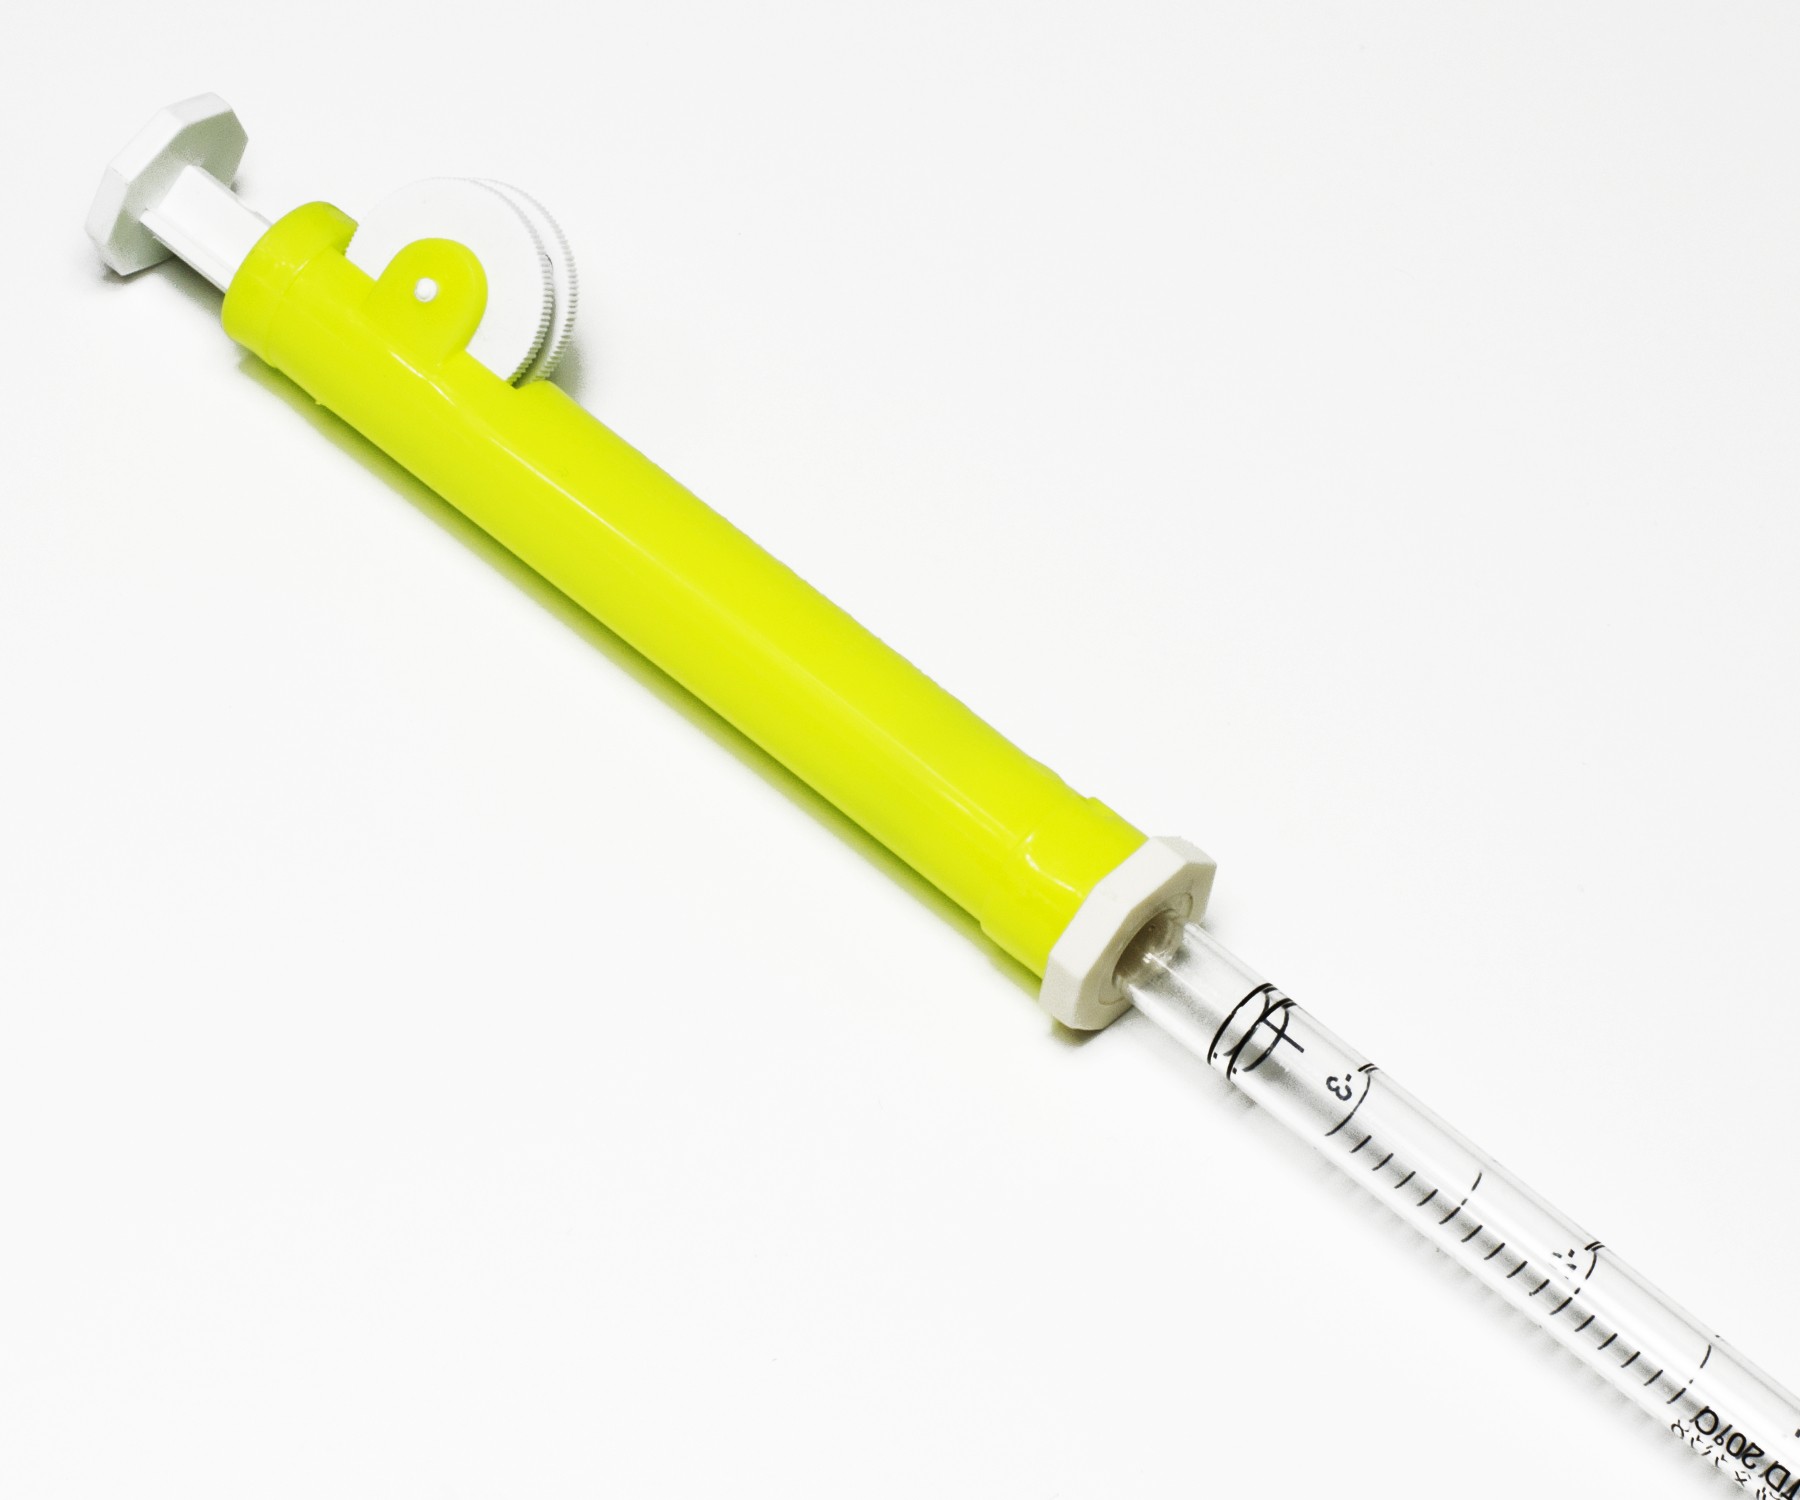 SP Bel-Art Pipette Pump 0.2ml Pipettor; Yellow